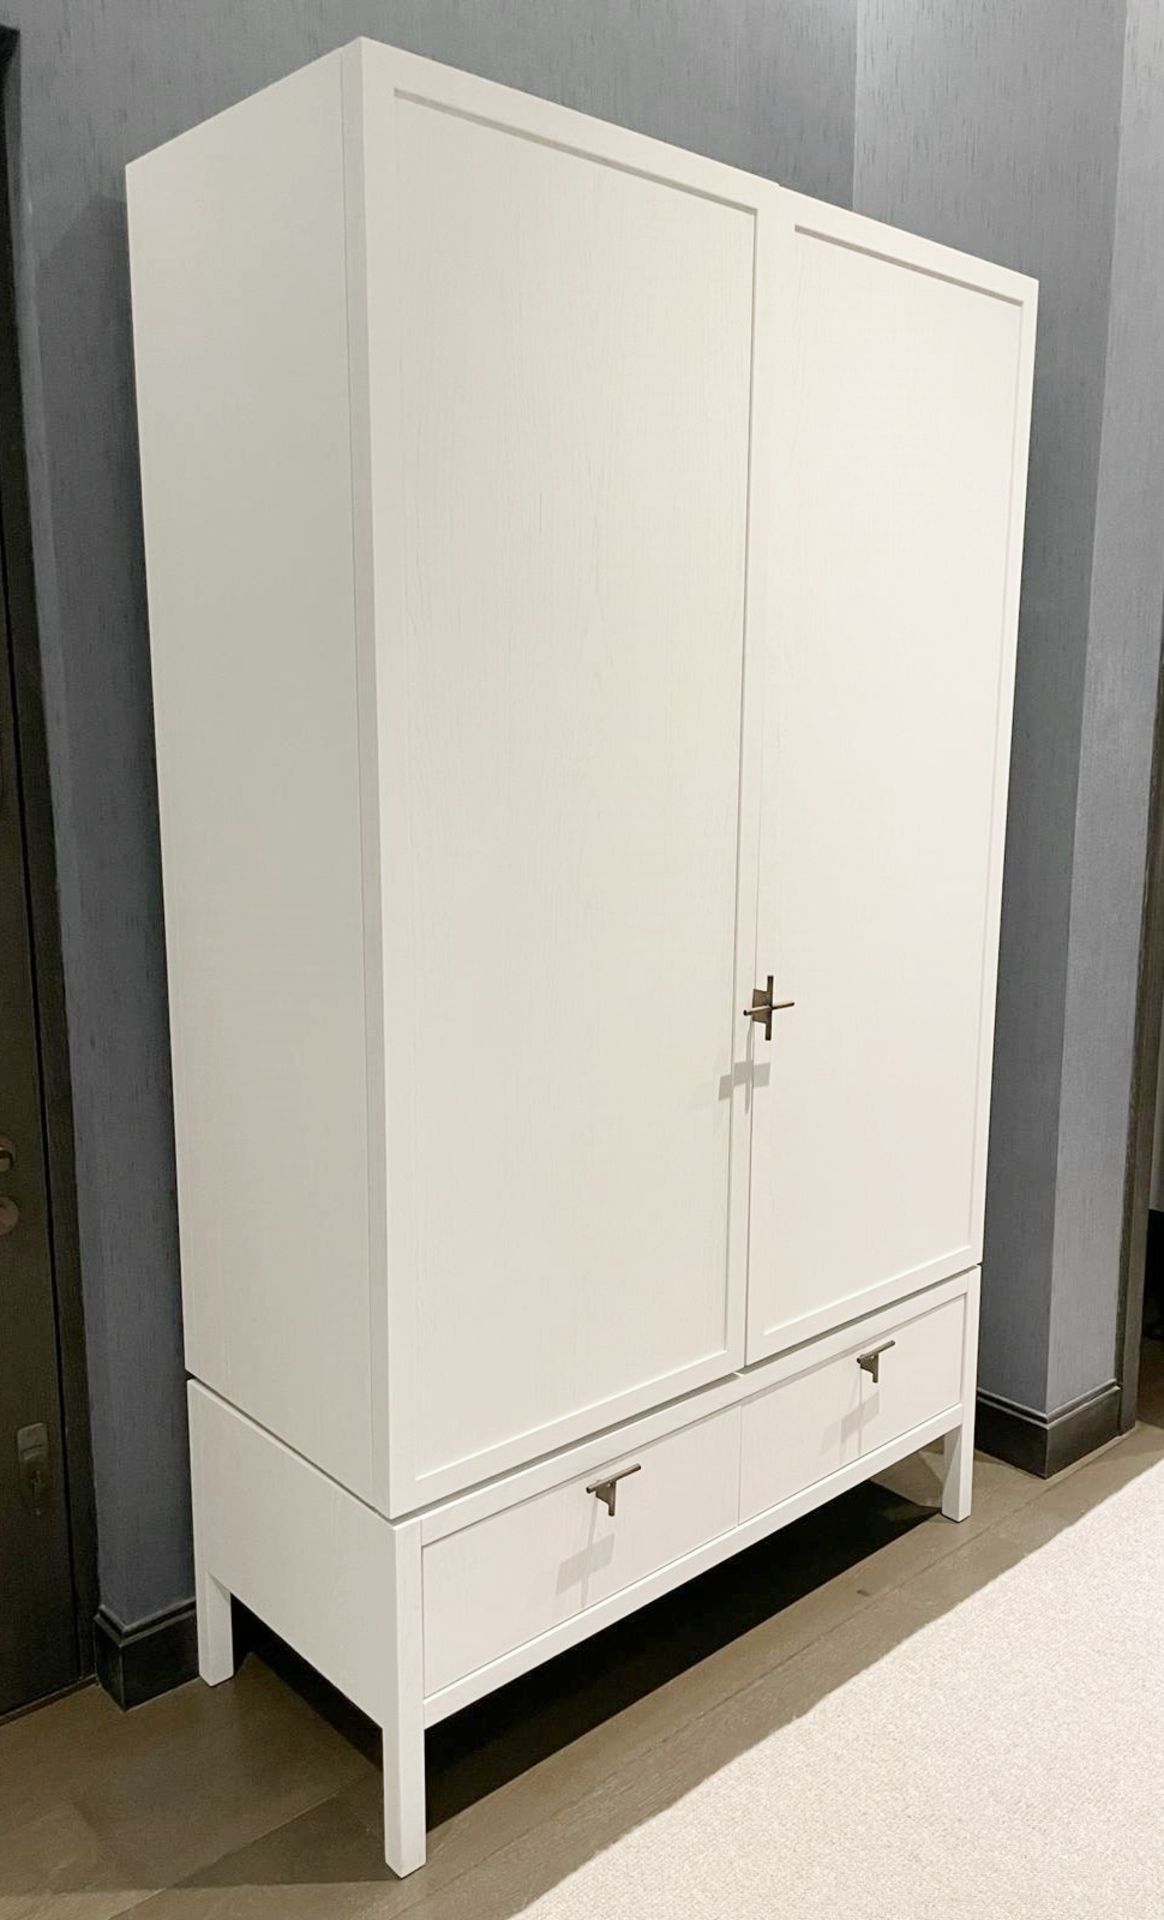 1 x Large Contemporary 2.2-Metre Tall 2-Door 2-Drawer Wardrobe With Brass Handles - Image 21 of 24